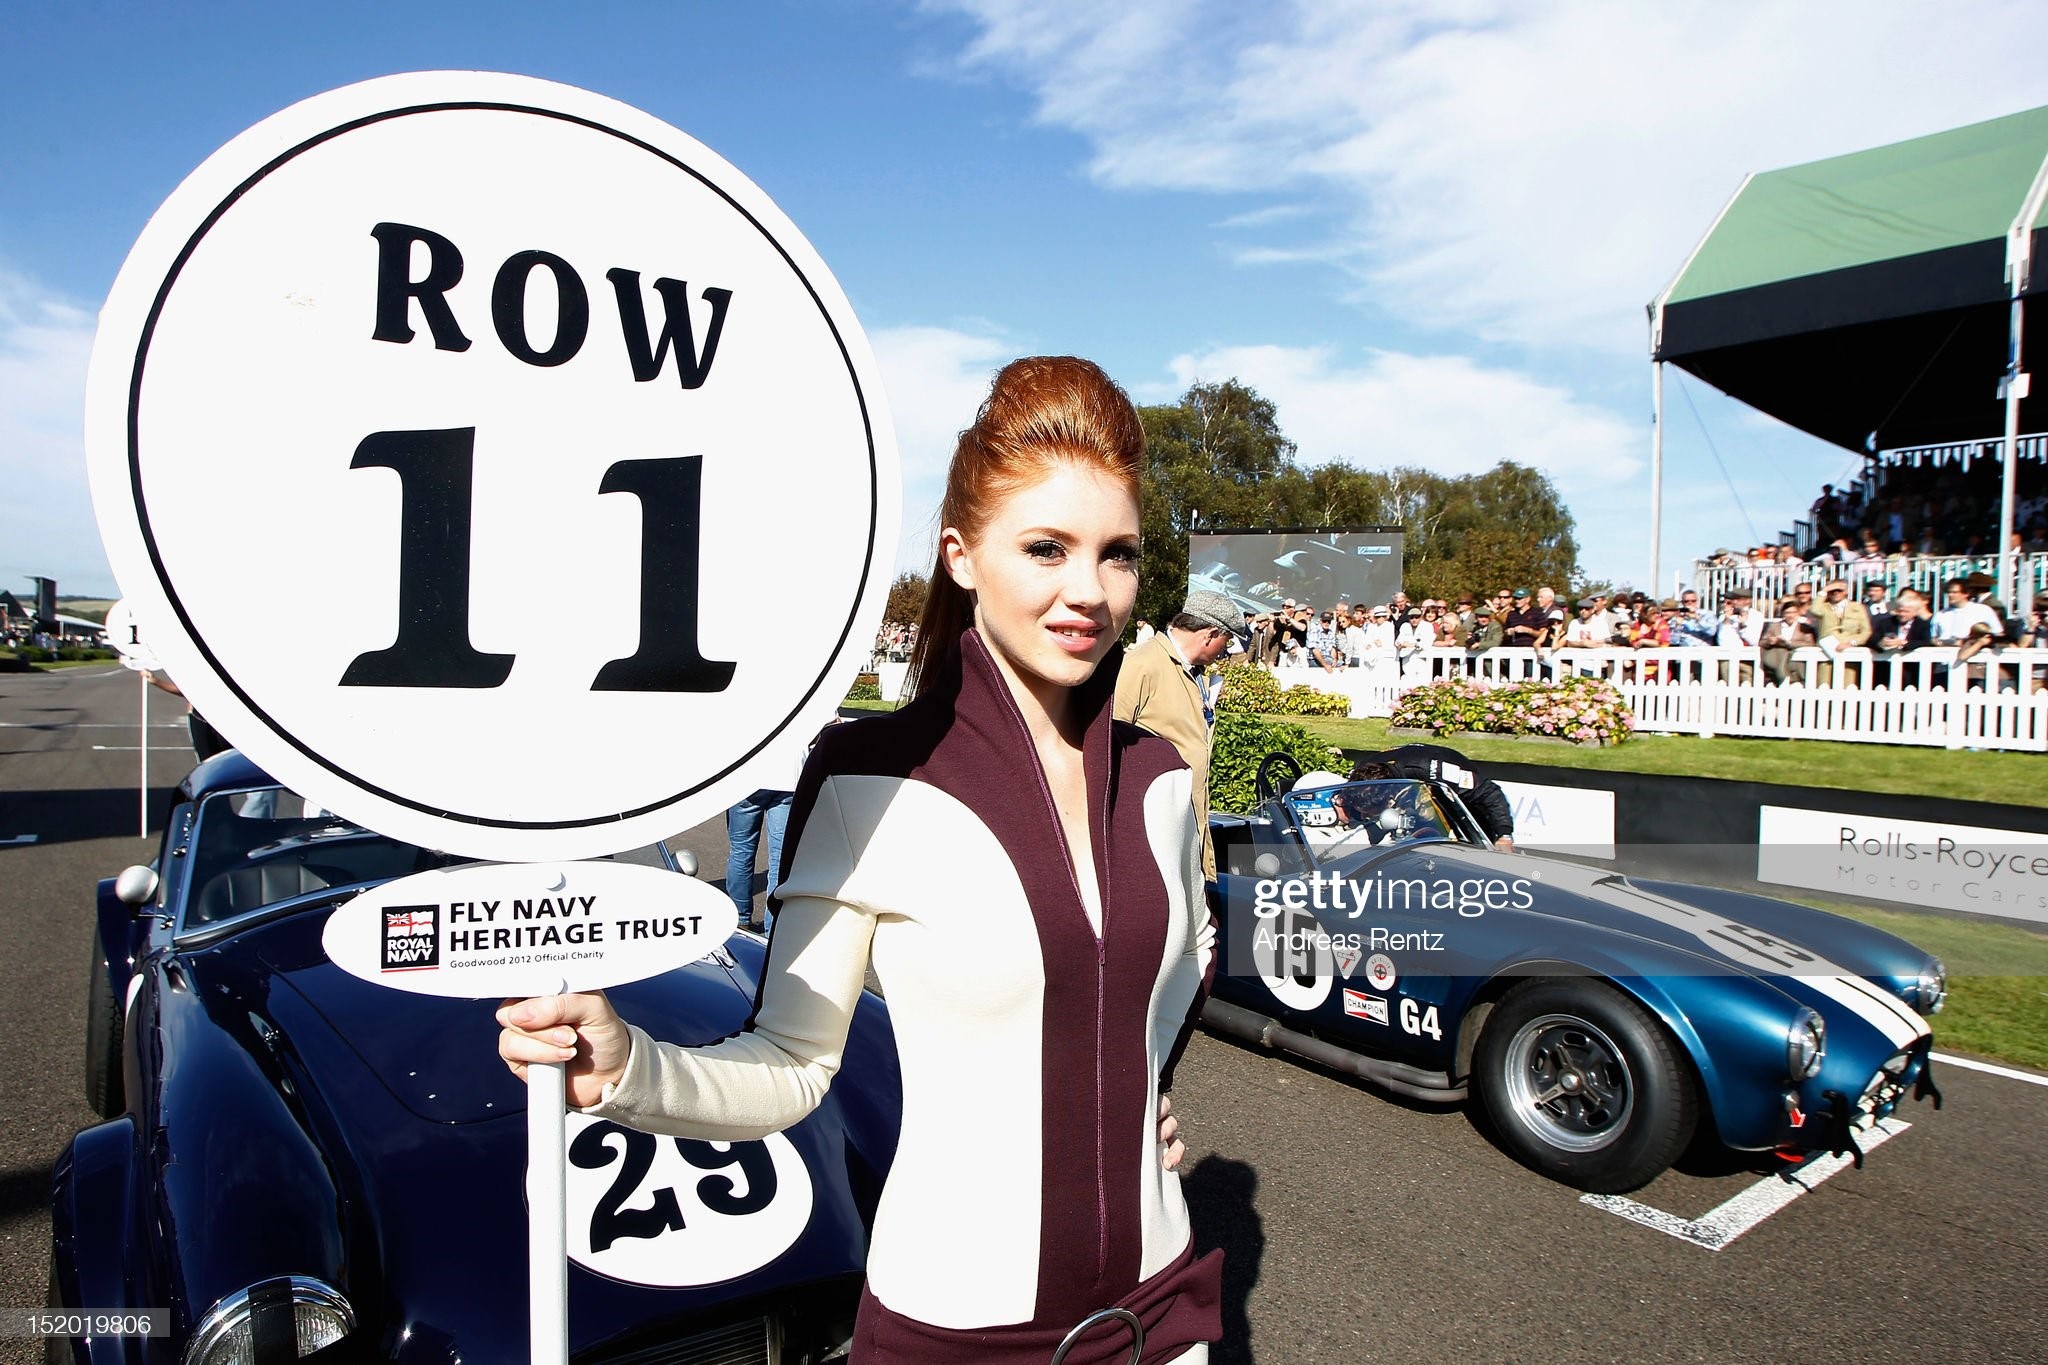 A grid girl stands next to Jochen Mass n.15 of Team Meilenwerk Historic Racing, during the Shelby Cup during the Goodwood Revival 2012 on September 15, 2012 in Chichester, United Kingdom. 